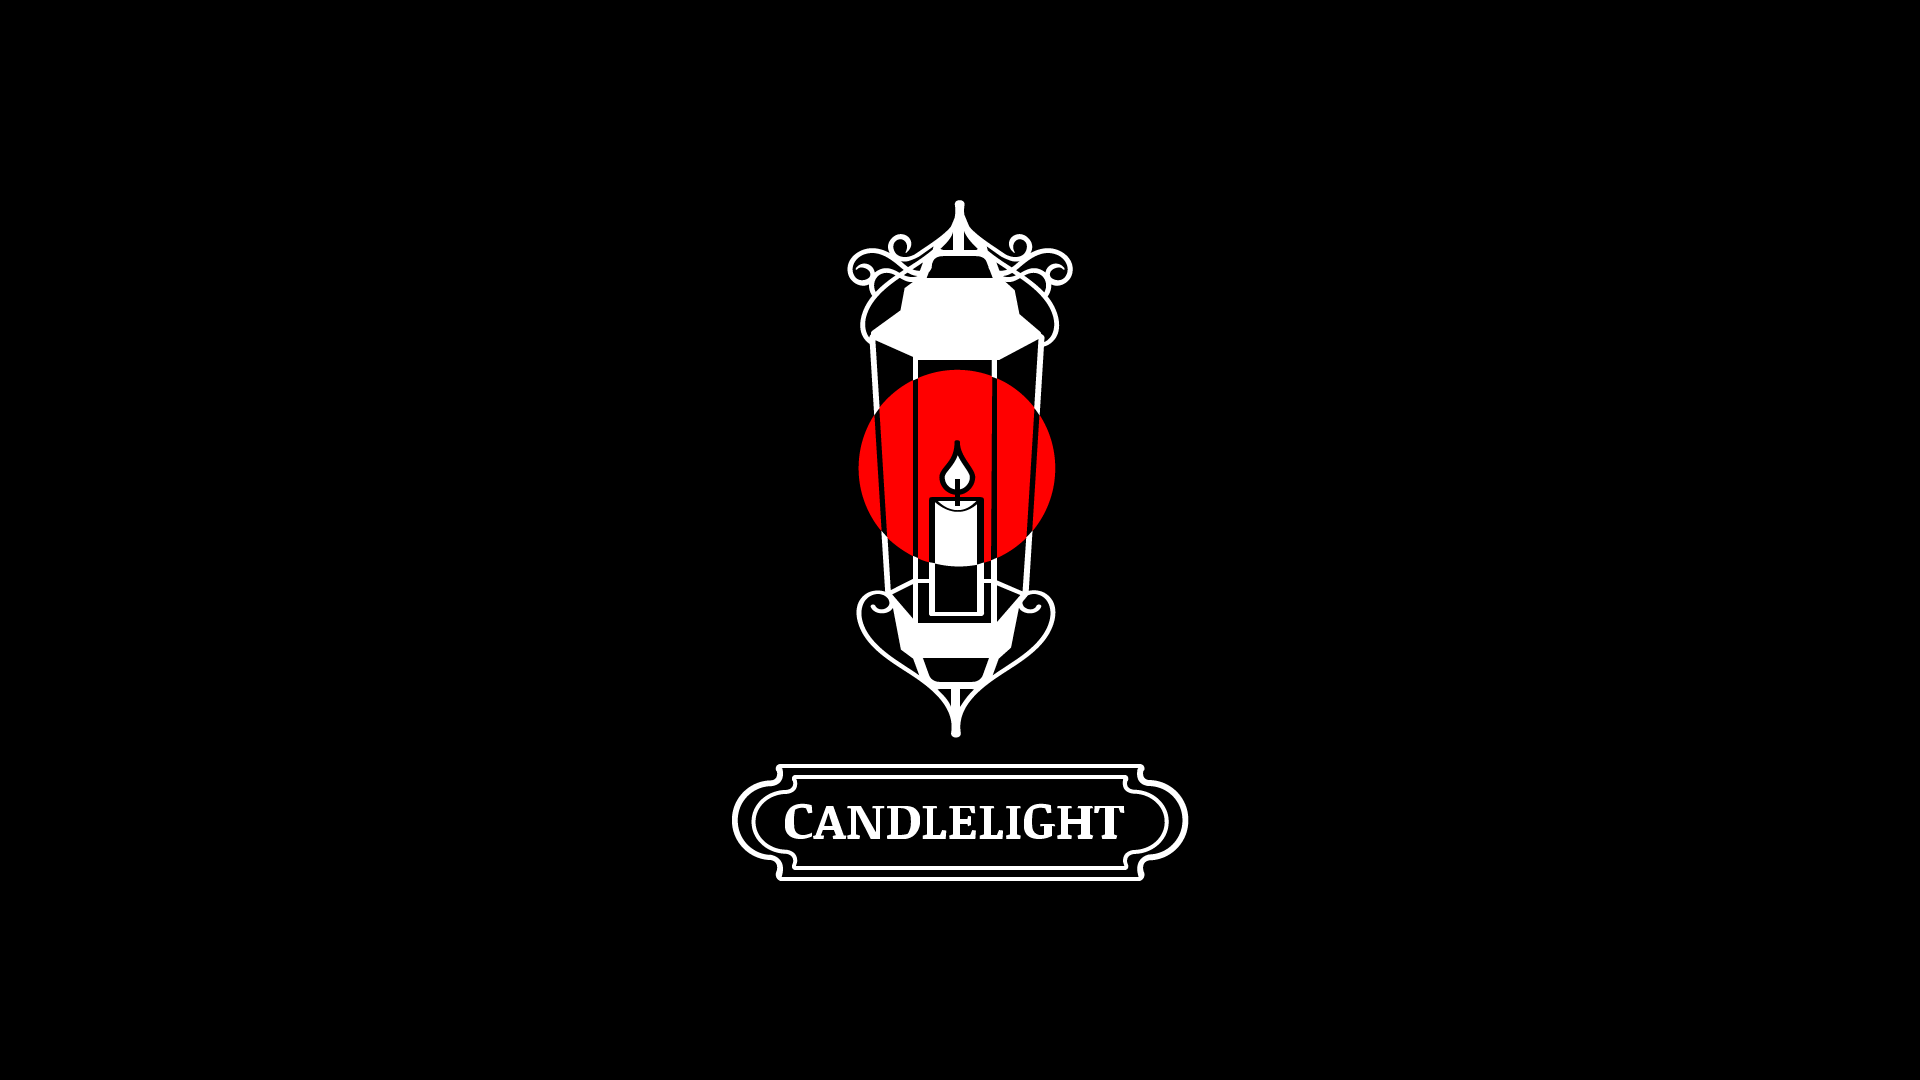 Candlelight (Portuguese Version)